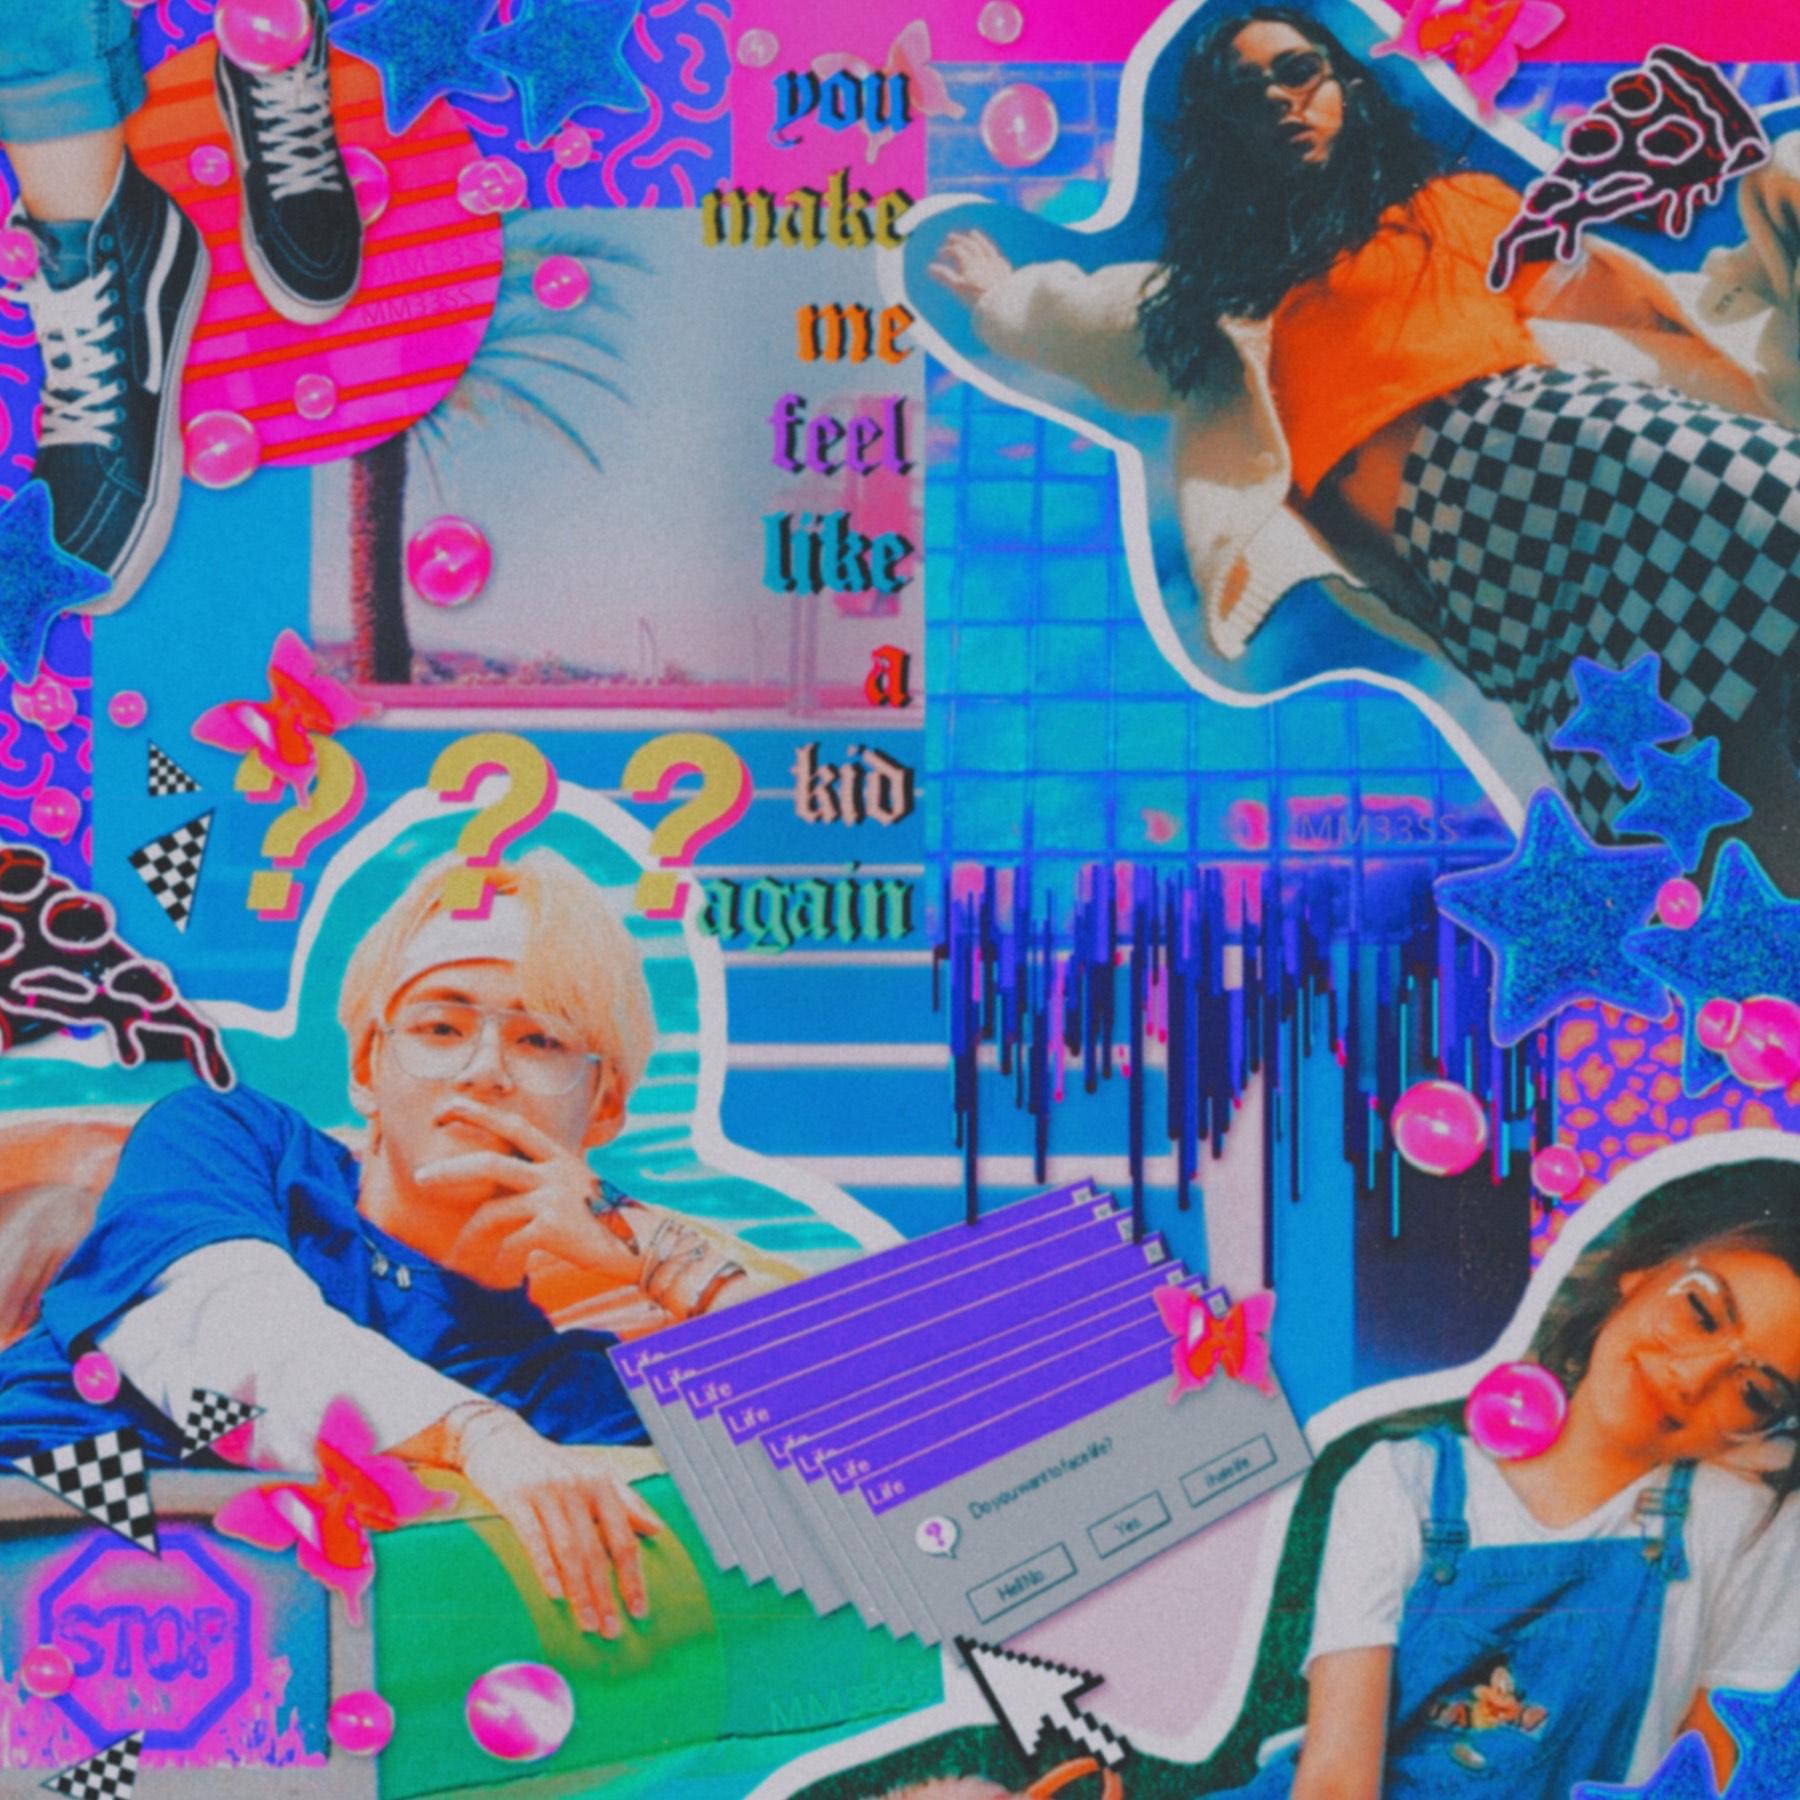 50 watt smile / filous & opia / May 18, 2021

I’m really pushing this retro summer vibe on myself lol

one day i’ll finish all the other edits i start and abandon 🙄

image: kim taehyung (V)